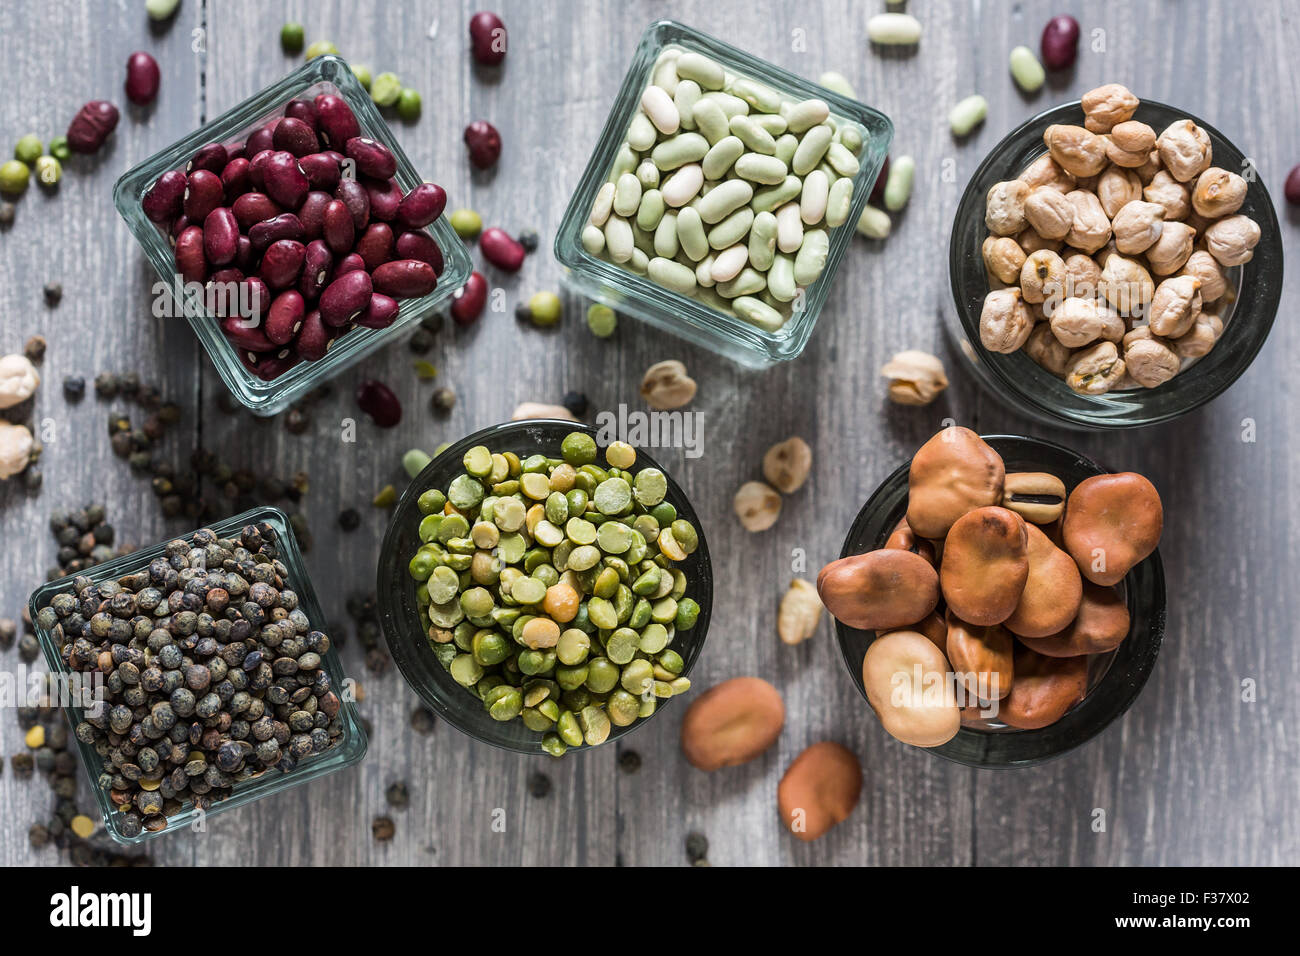 Dried pulses. Stock Photo